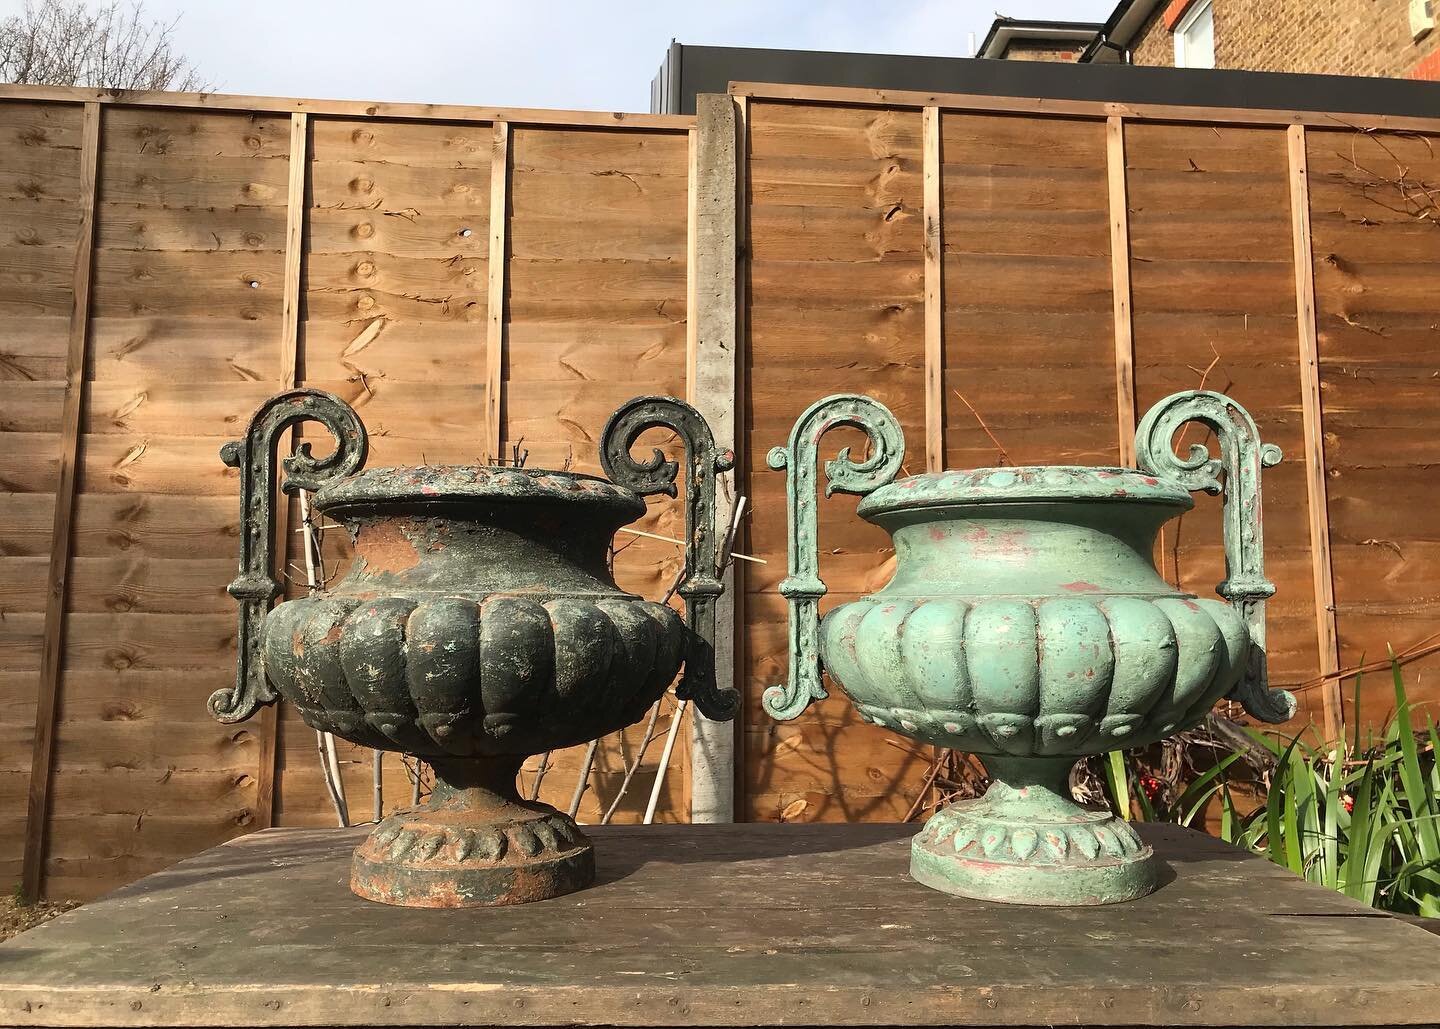 Lovely and unusual French cast iron garden urns from the 19th Century, before and after, but still work in progress
#antiques #interiordesign #interiors #interiordecor #antiquedealer #london #anitquegardenfurniture #architecturalantiques #architectur